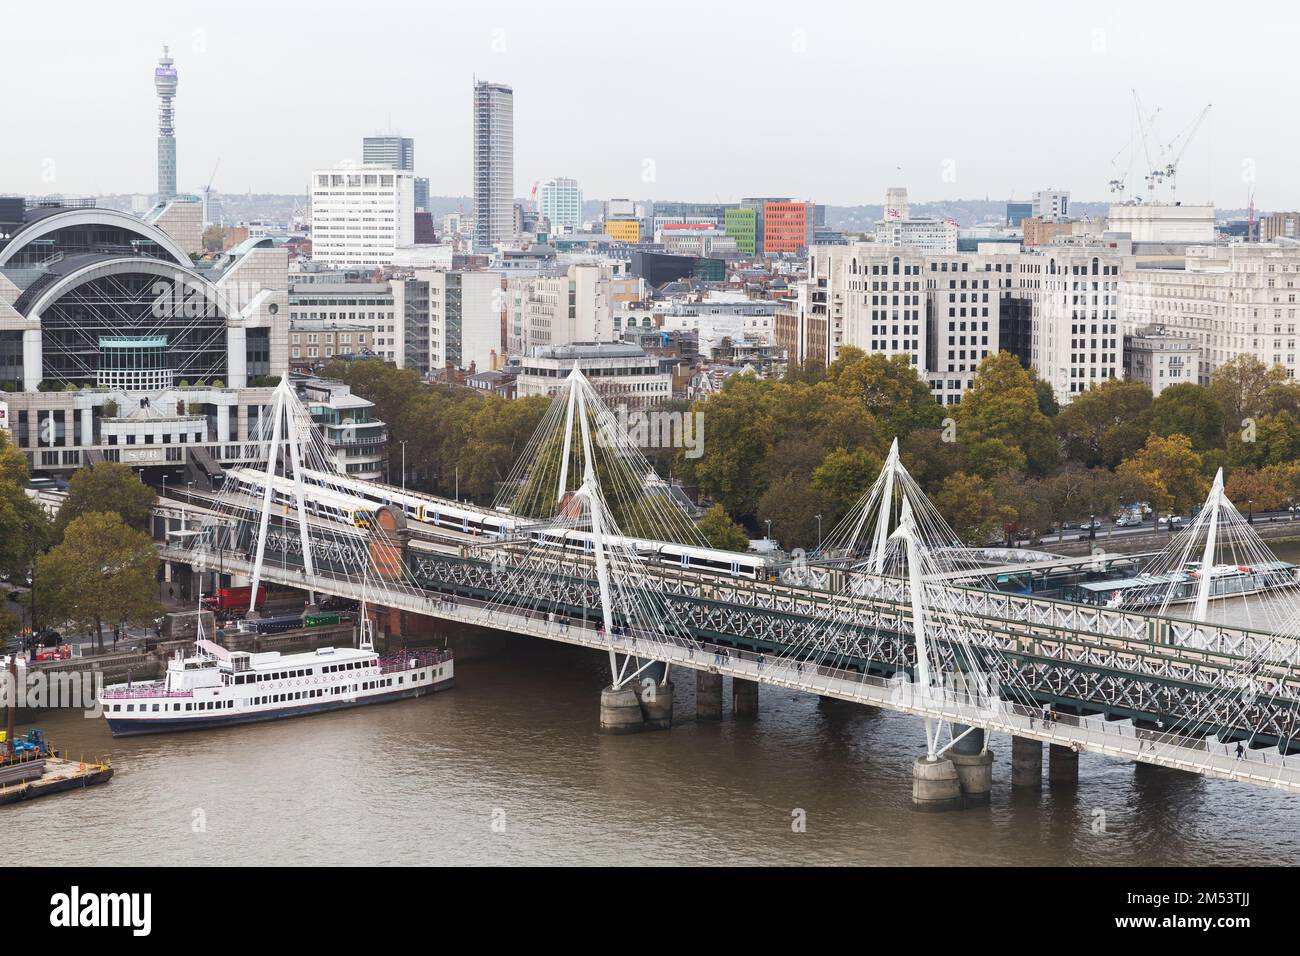 London, United Kingdom - October 31, 2017: London cityscape aerial view. Waterloo station, Hungerford Bridge and Golden Jubilee Bridges on a daytime Stock Photo